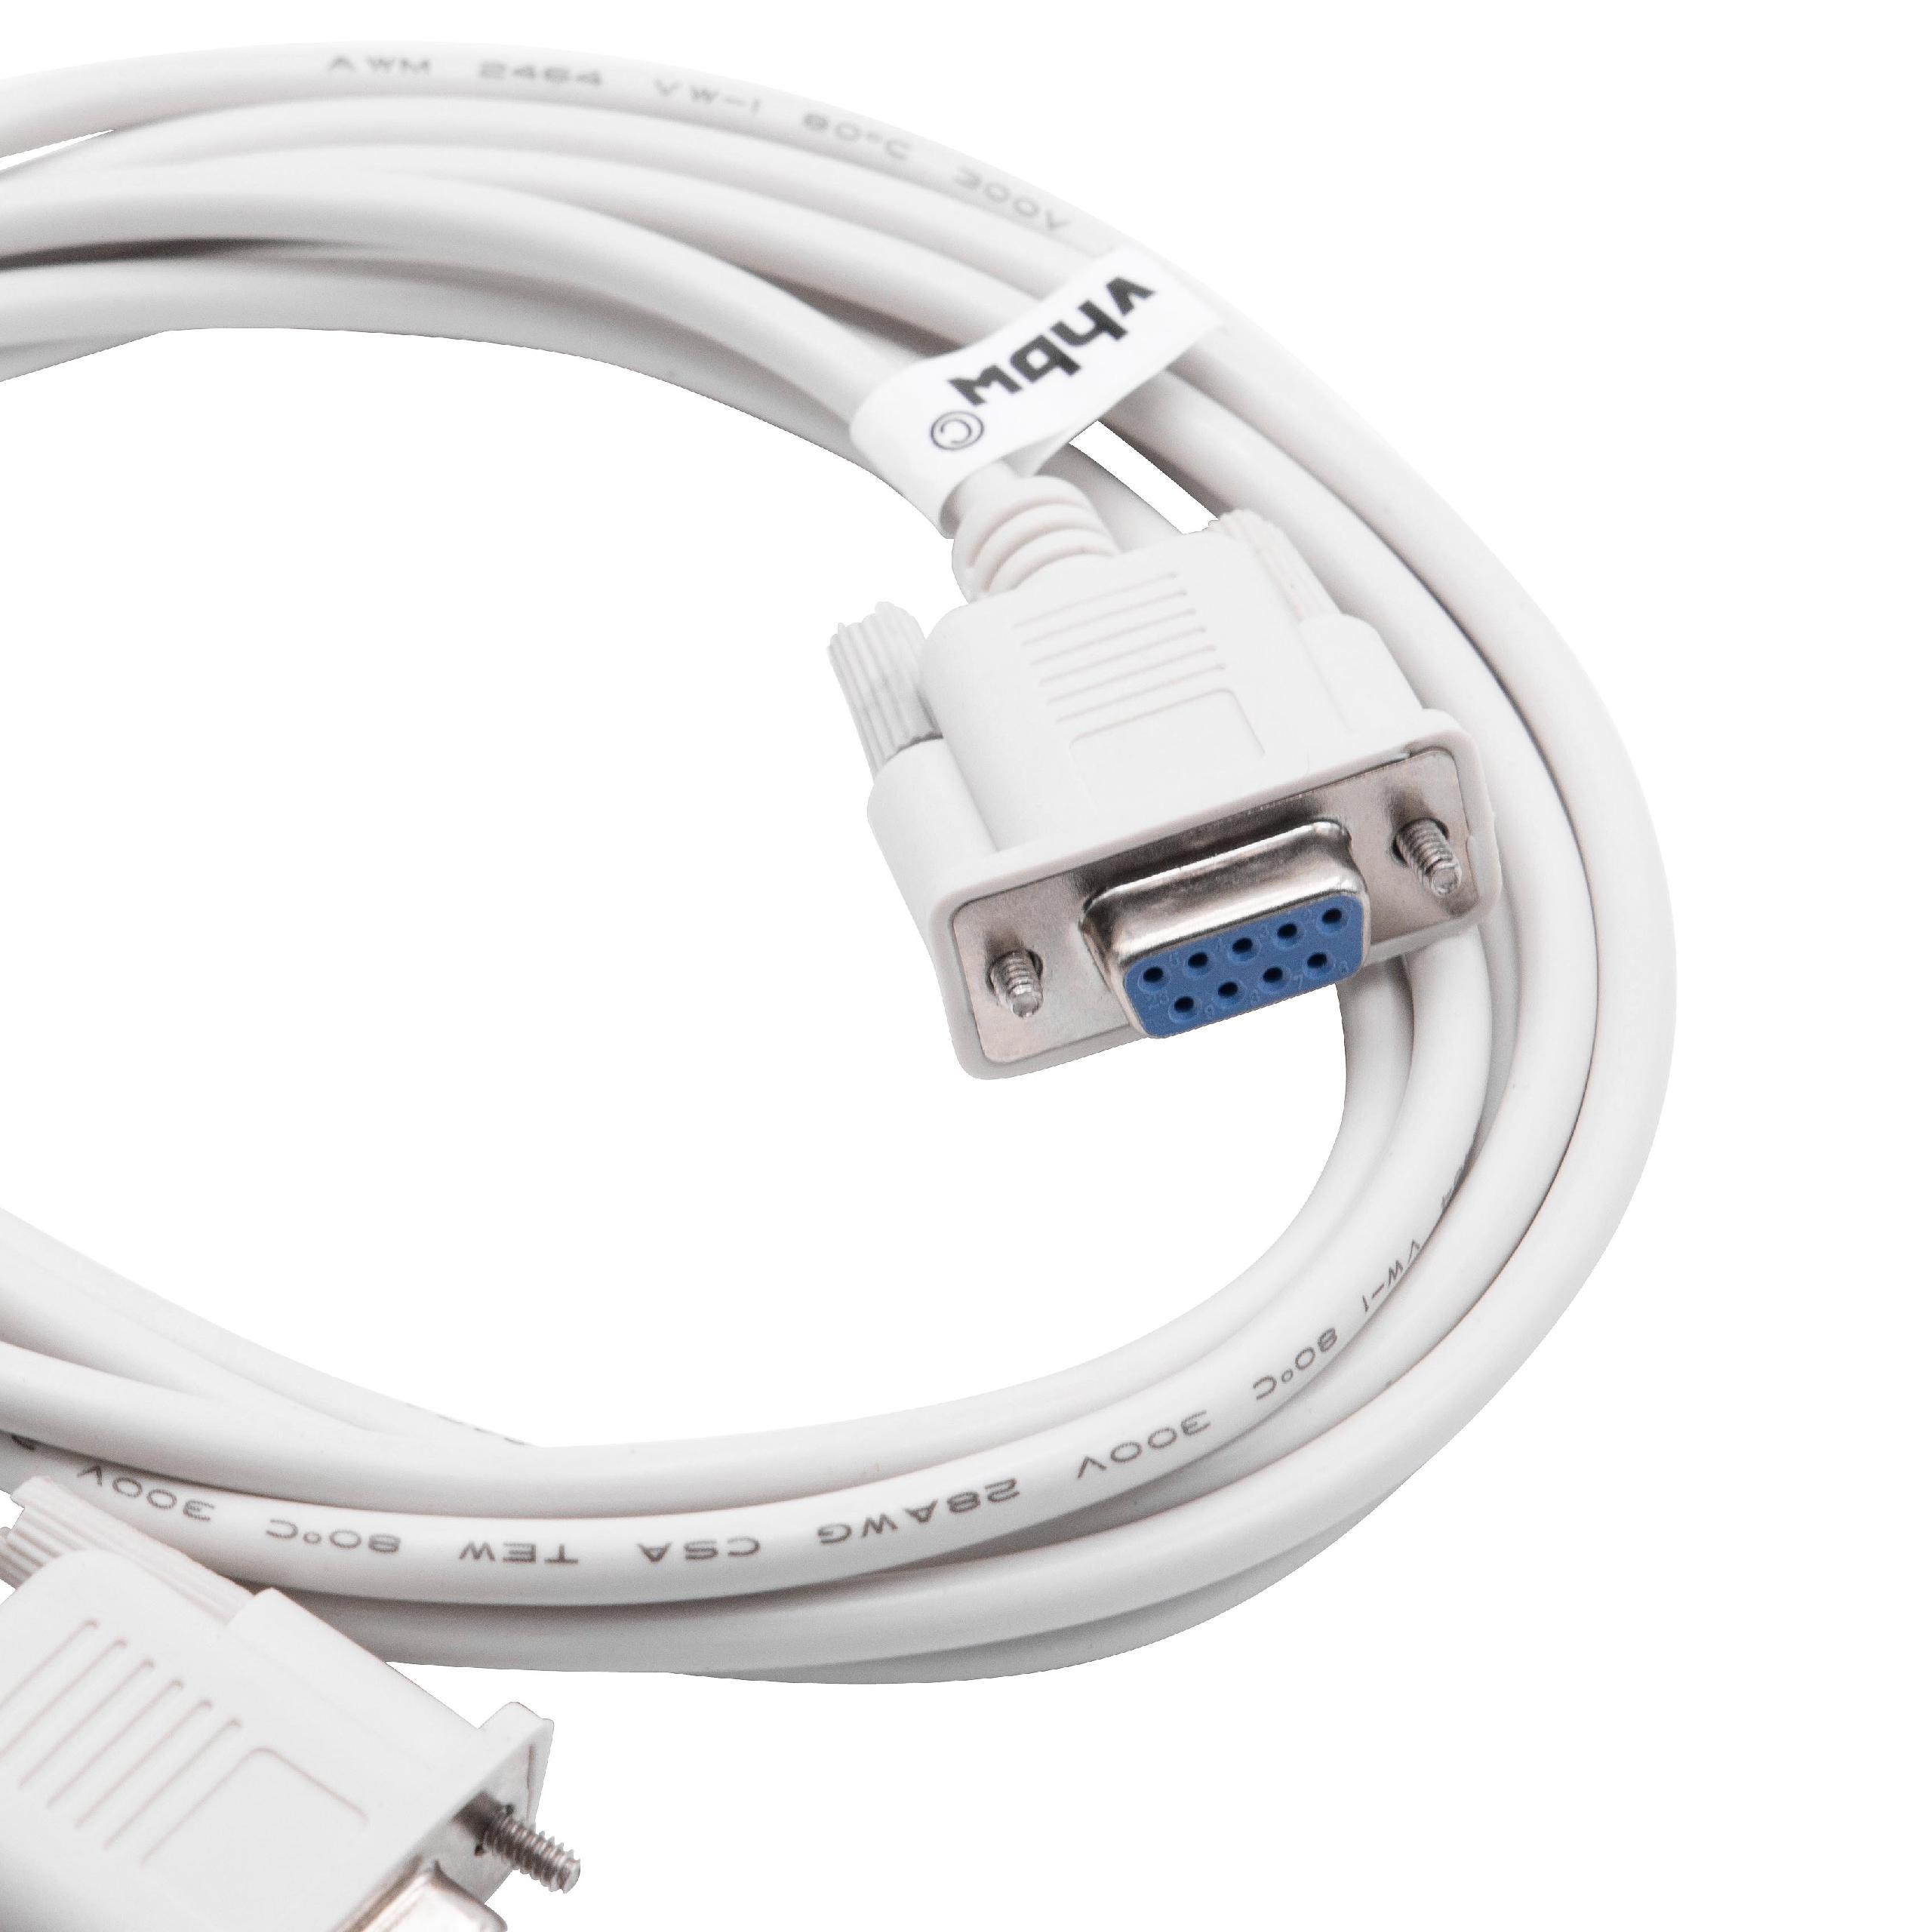 RS232 Null Modem Cable (Crossover Serial Line) For Dreambox Free ...